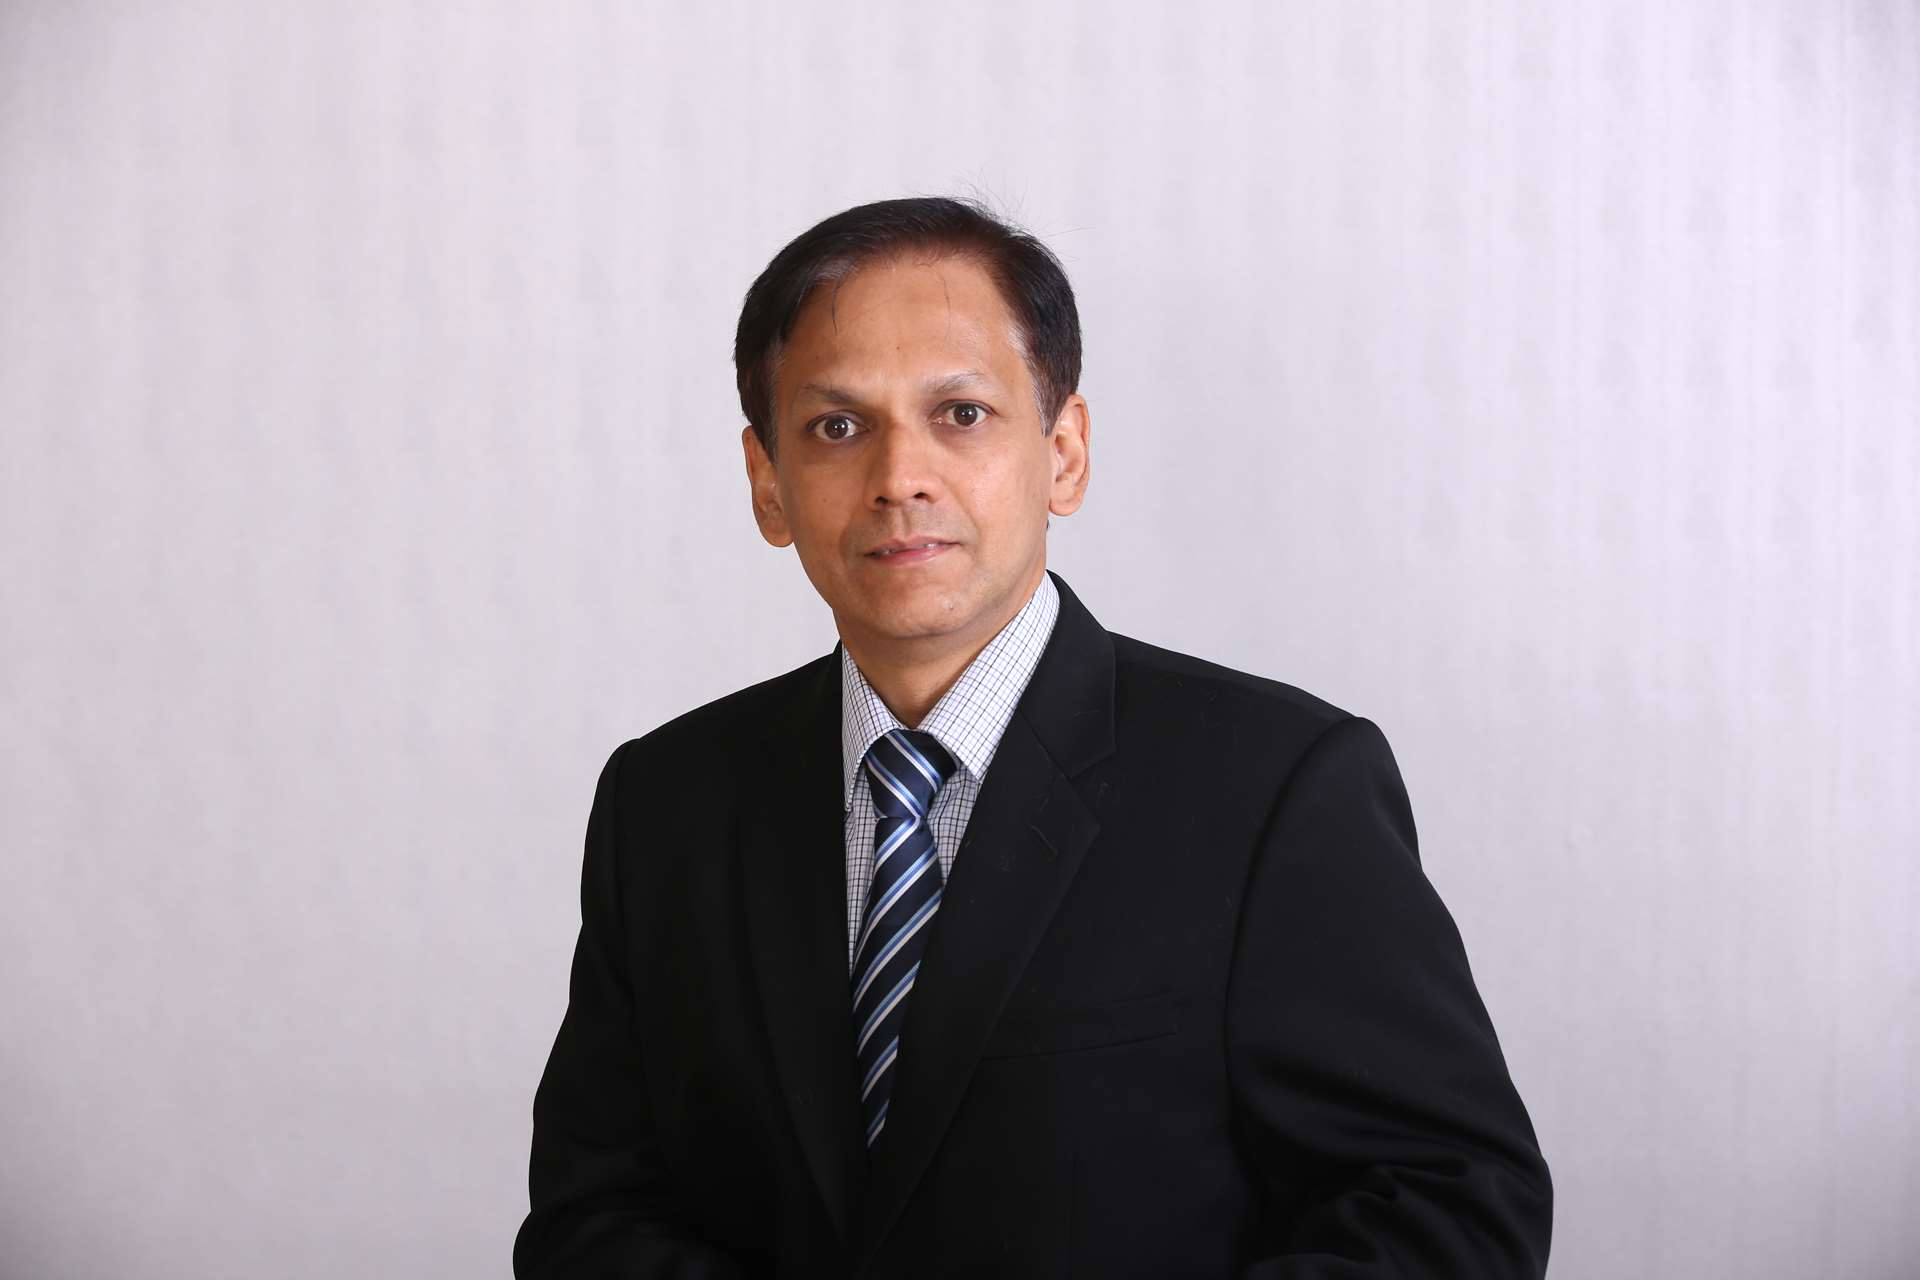 Rejeesh Balasubramaniam, Head of Audit and Accounting Quality Management